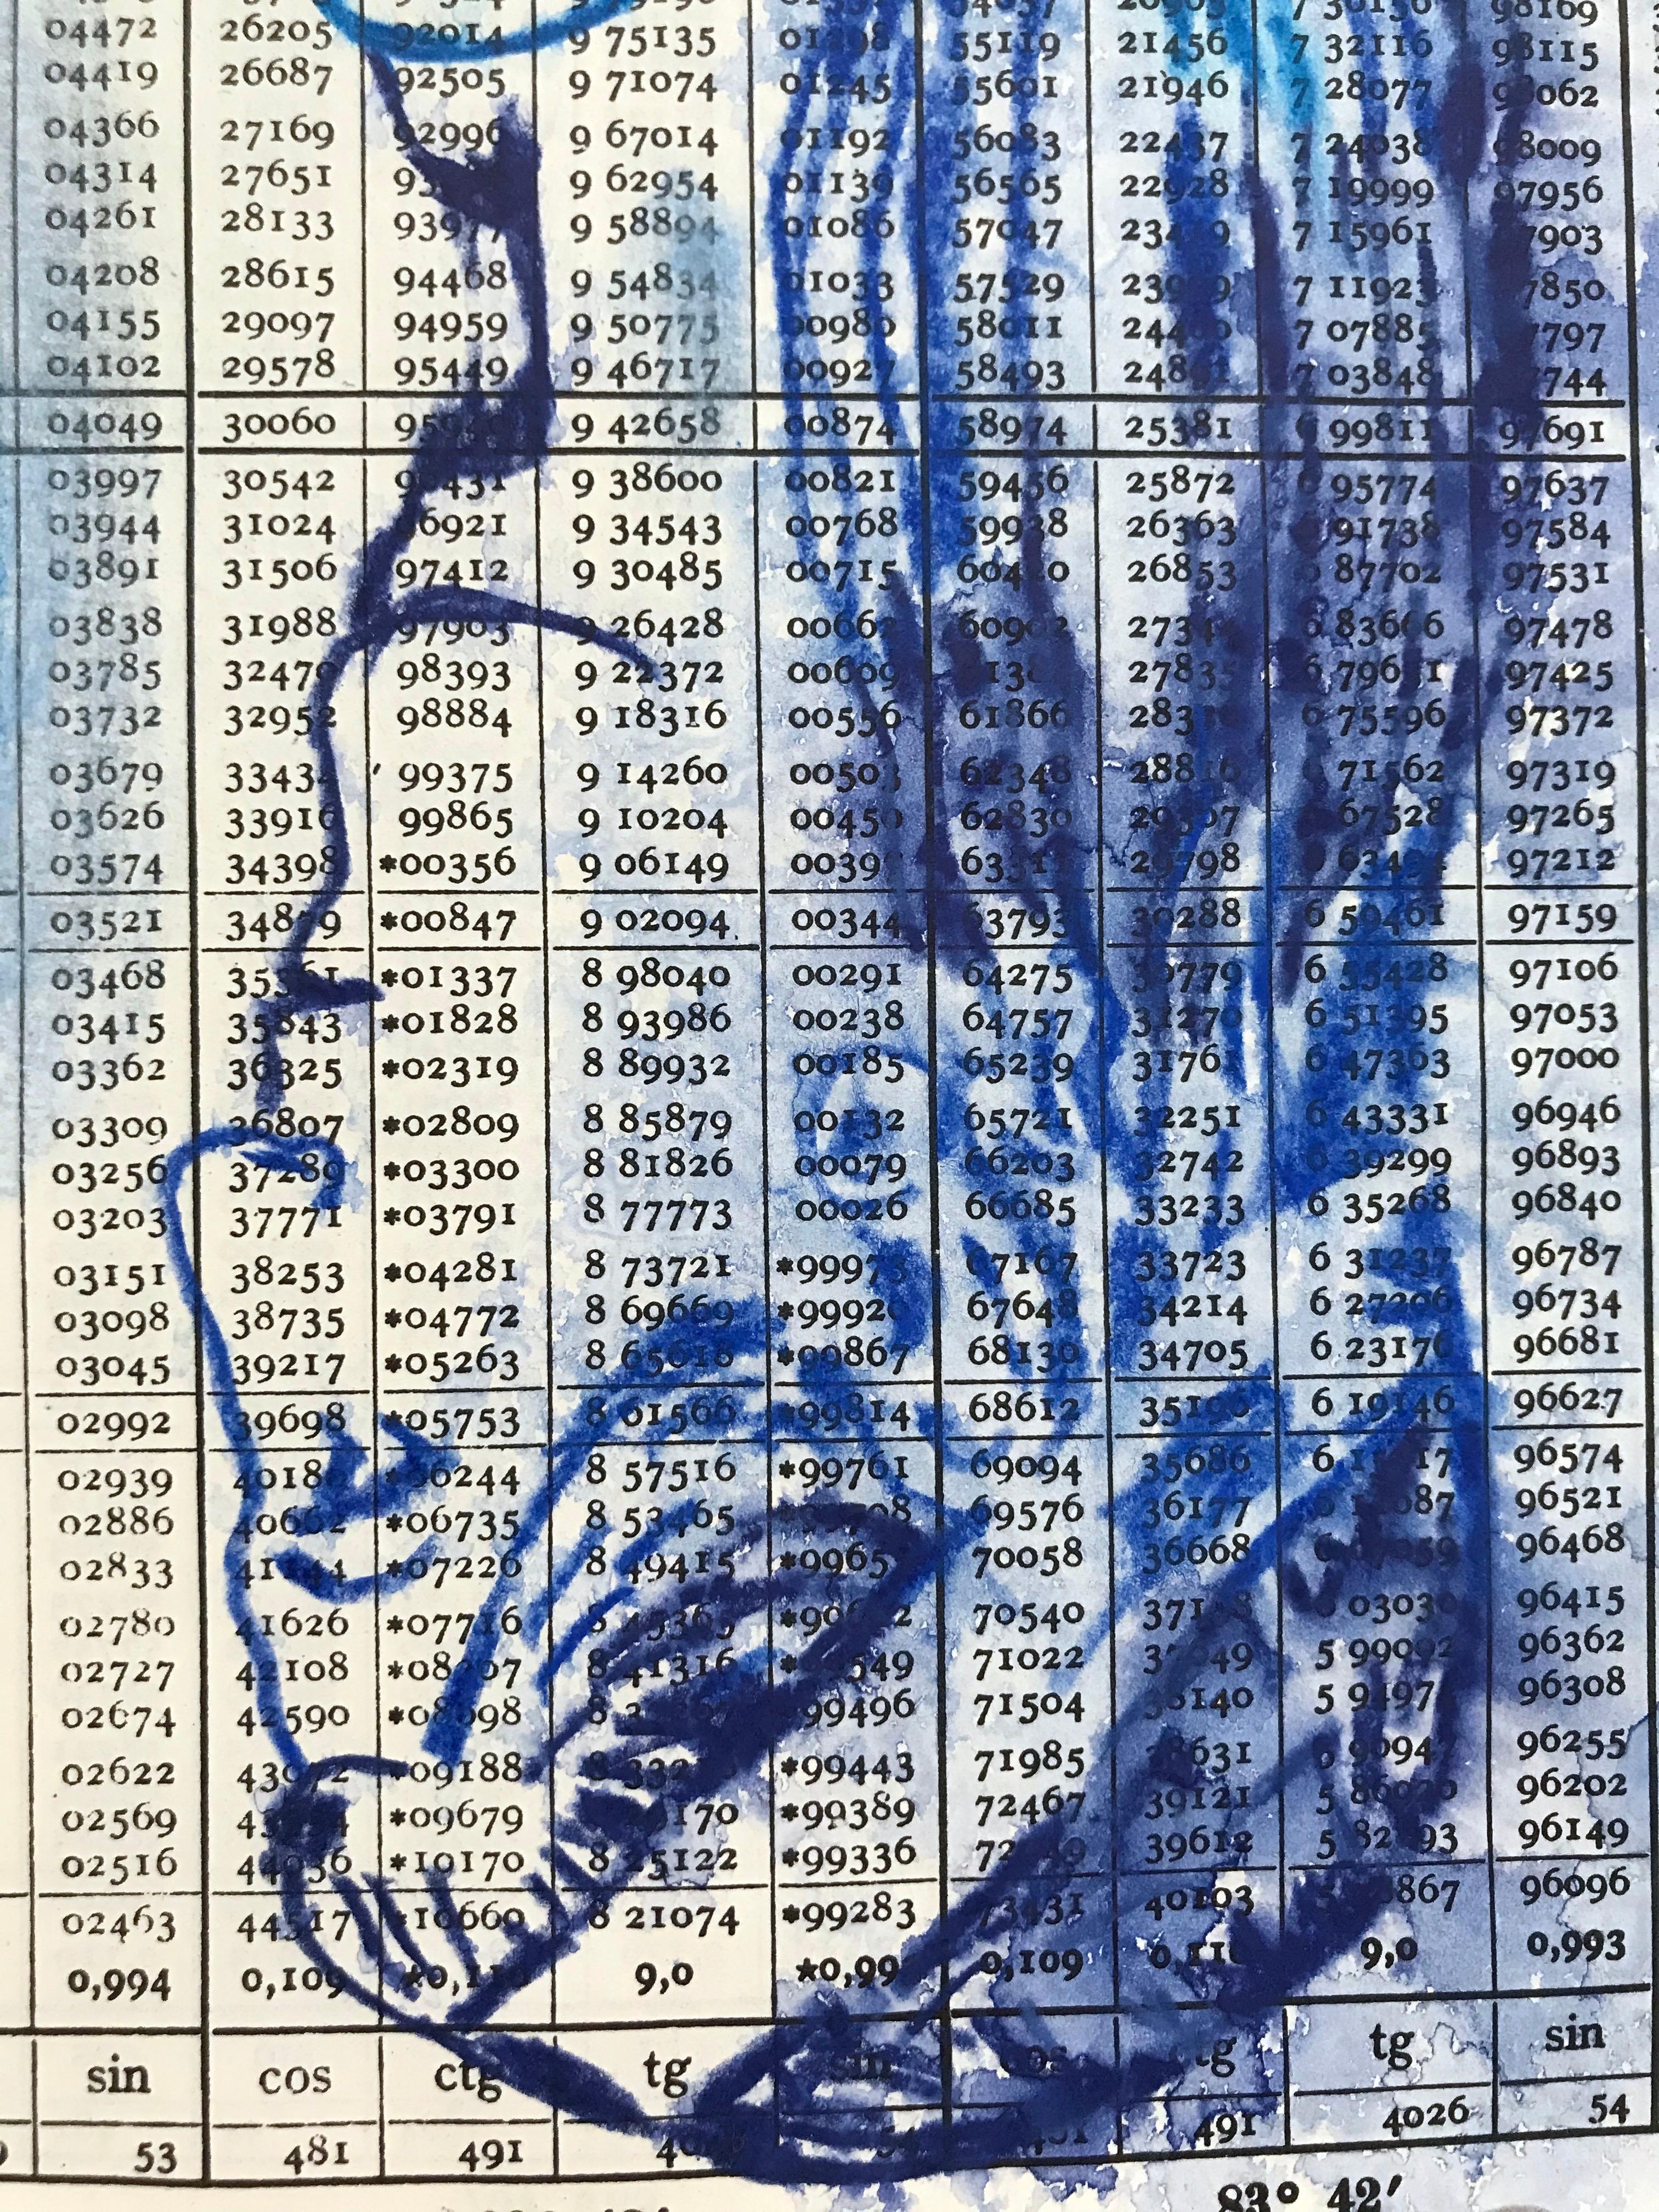 Brian Fekete’s “No. 127” is a small, unframed, monochromatic 10 x 8 inch watercolor pencil drawing in deep blue of a woman’s head in profile on a page from a 1943 trigonometry resource printed with regular columns of numerical results. Reflected